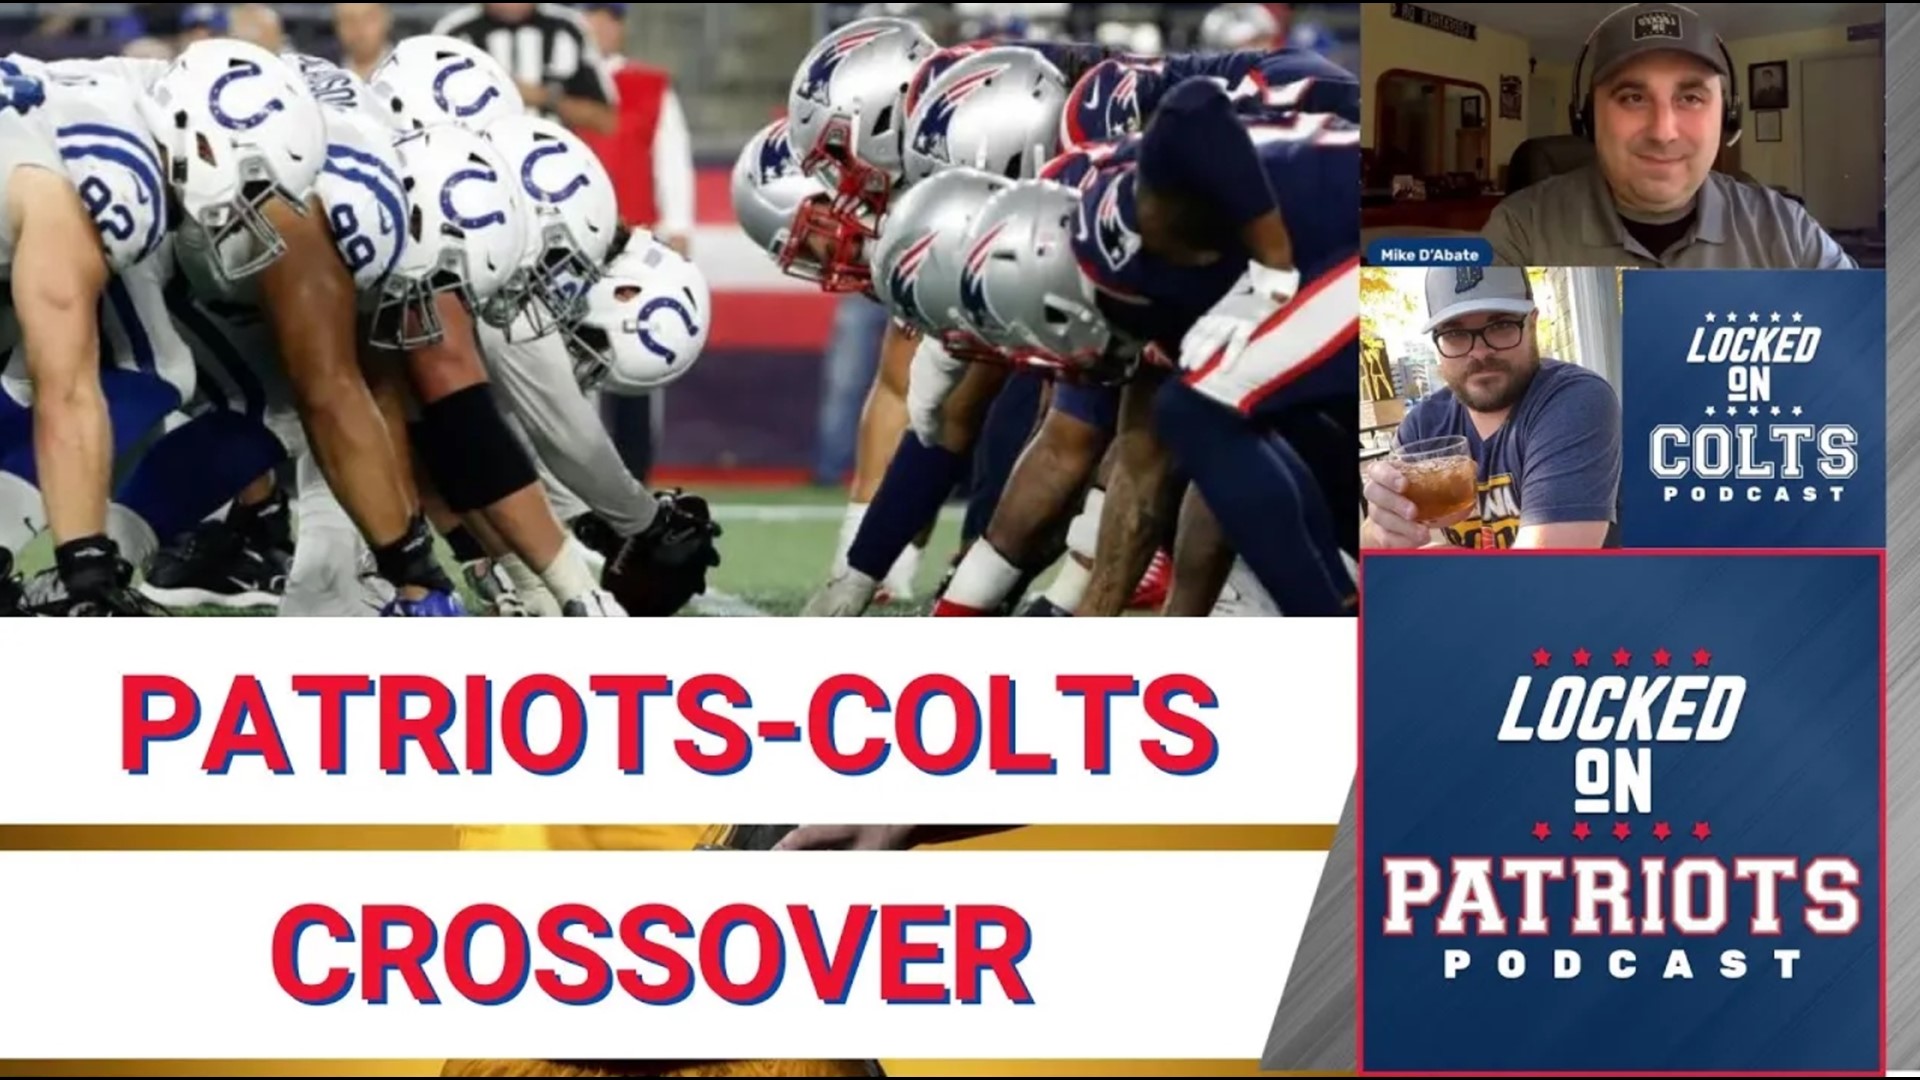 It’s Crossover Thursday on the Locked On Podcast Network. Join Mike D’Abate of Locked On Patriots and Jake Arthur of Locked On Colts as they preview Sunday's game.